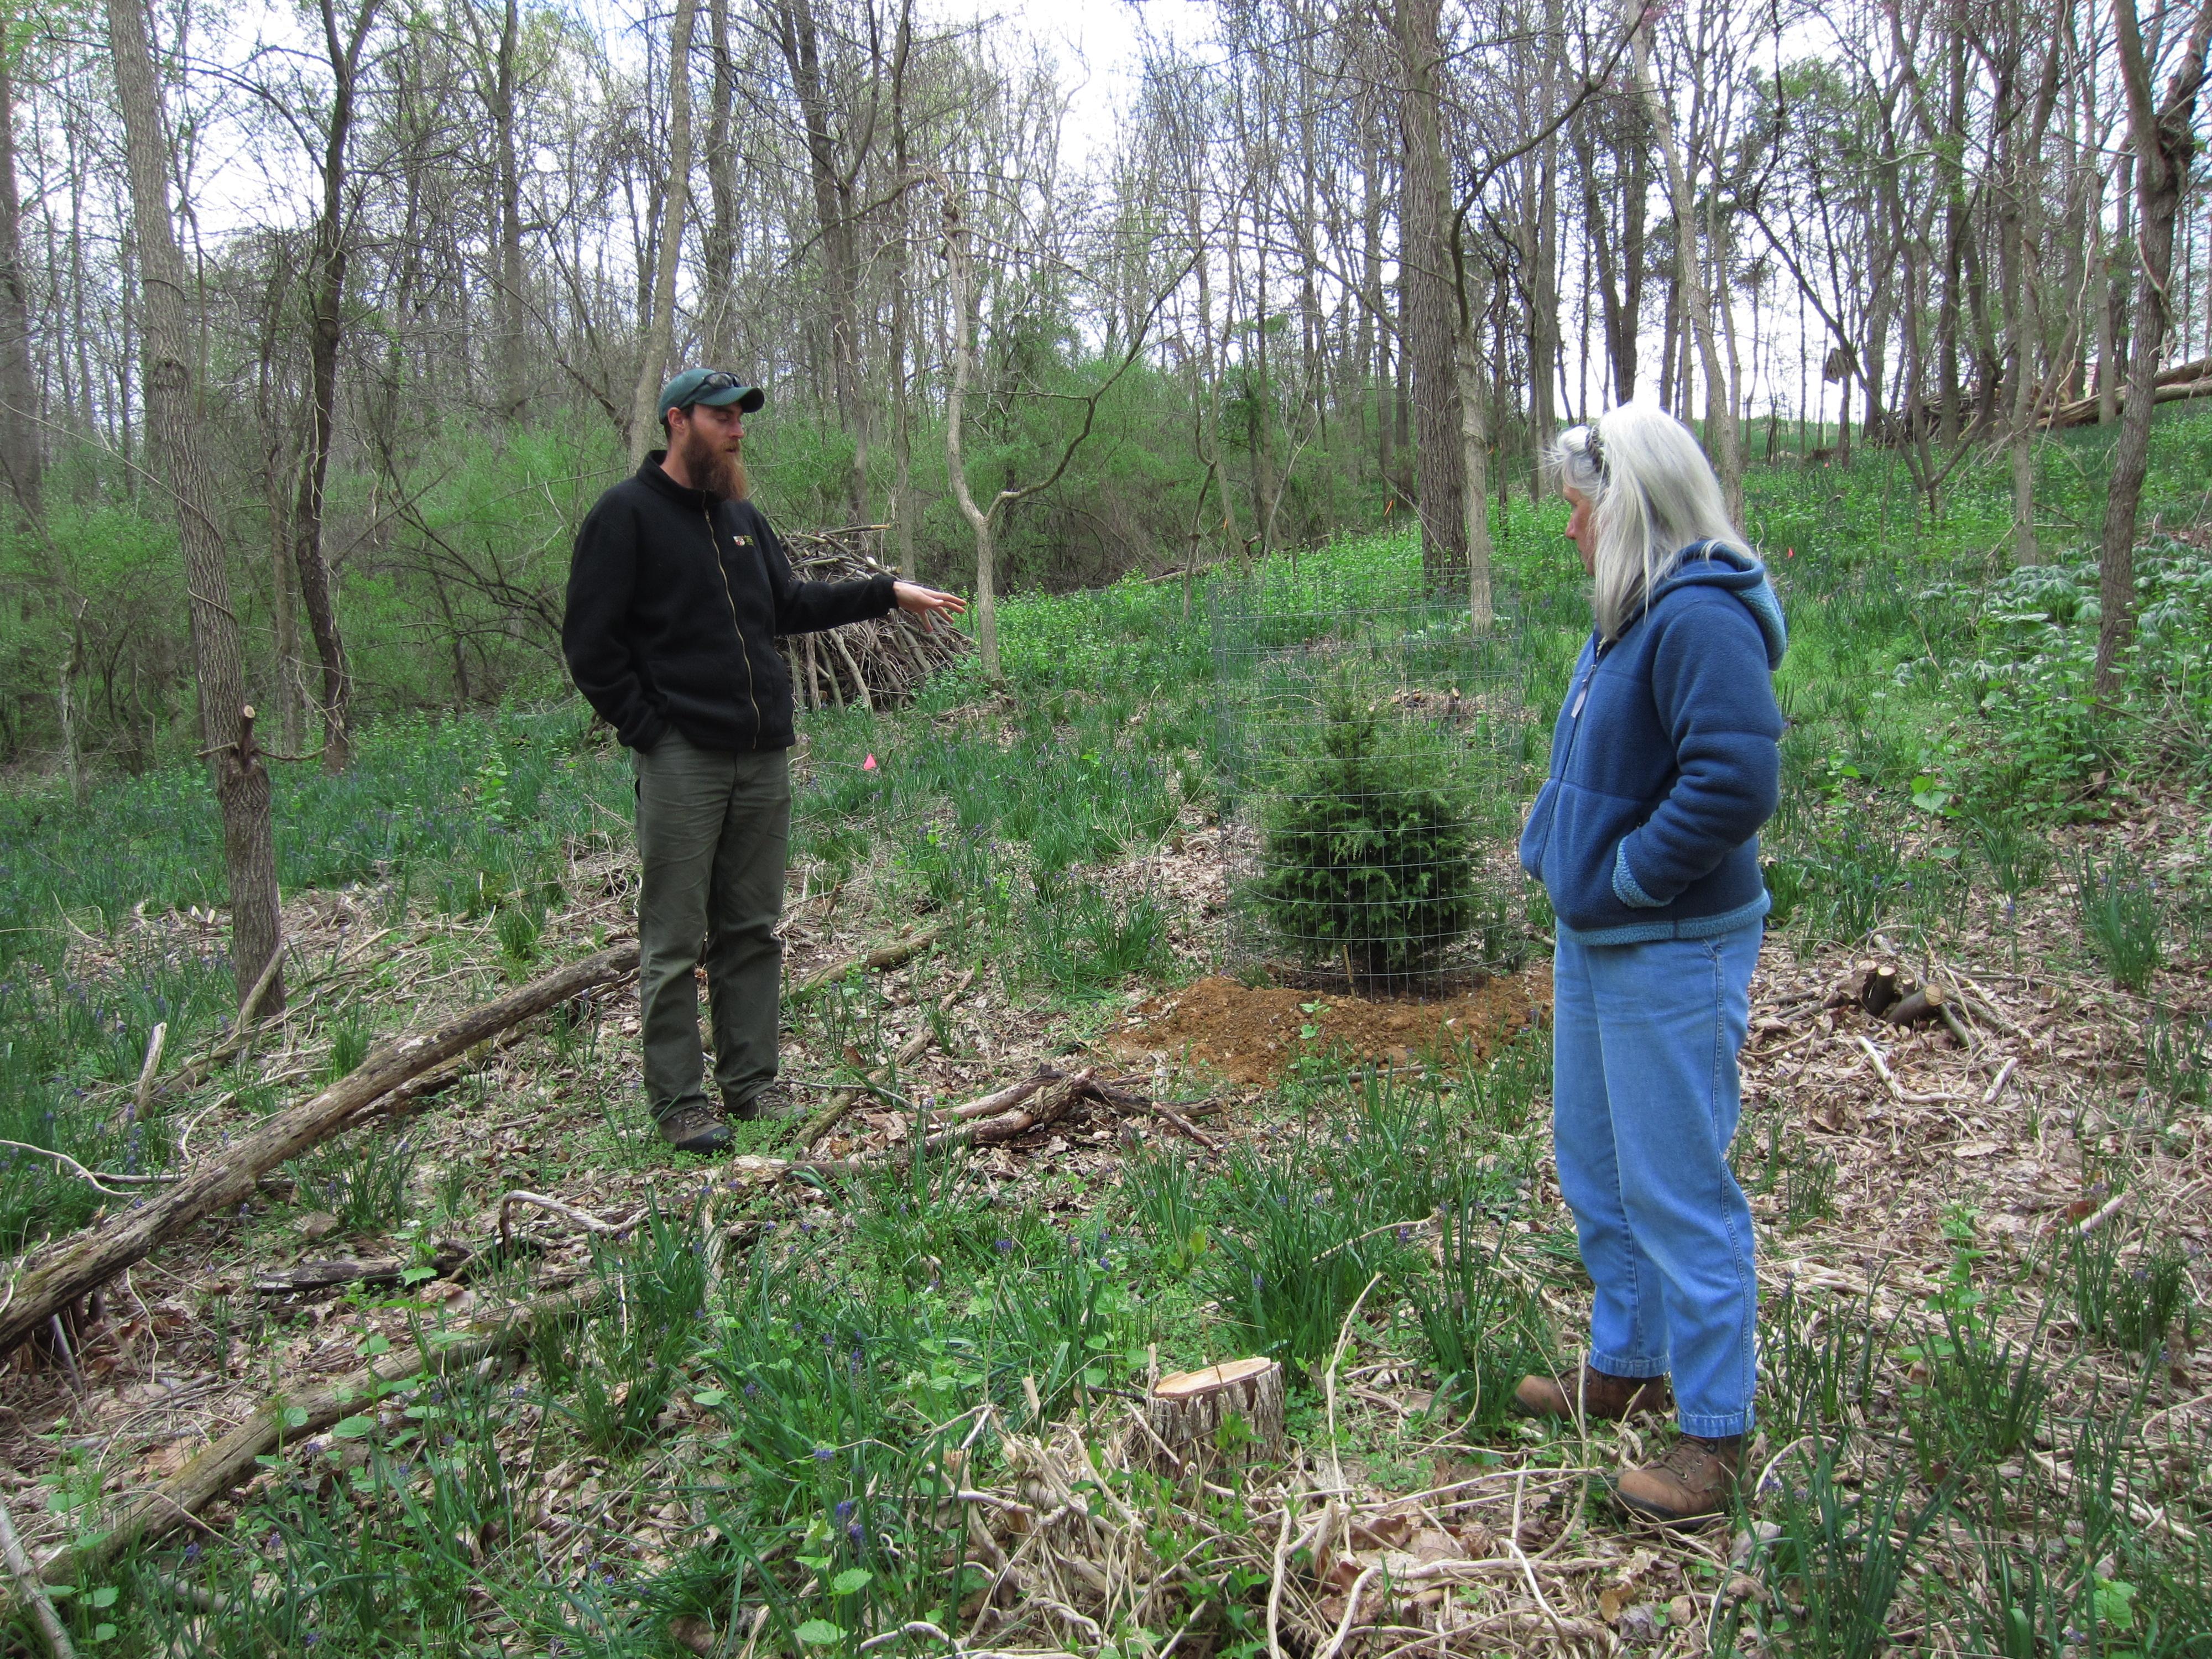 A Maryland county forester talks with a landowner